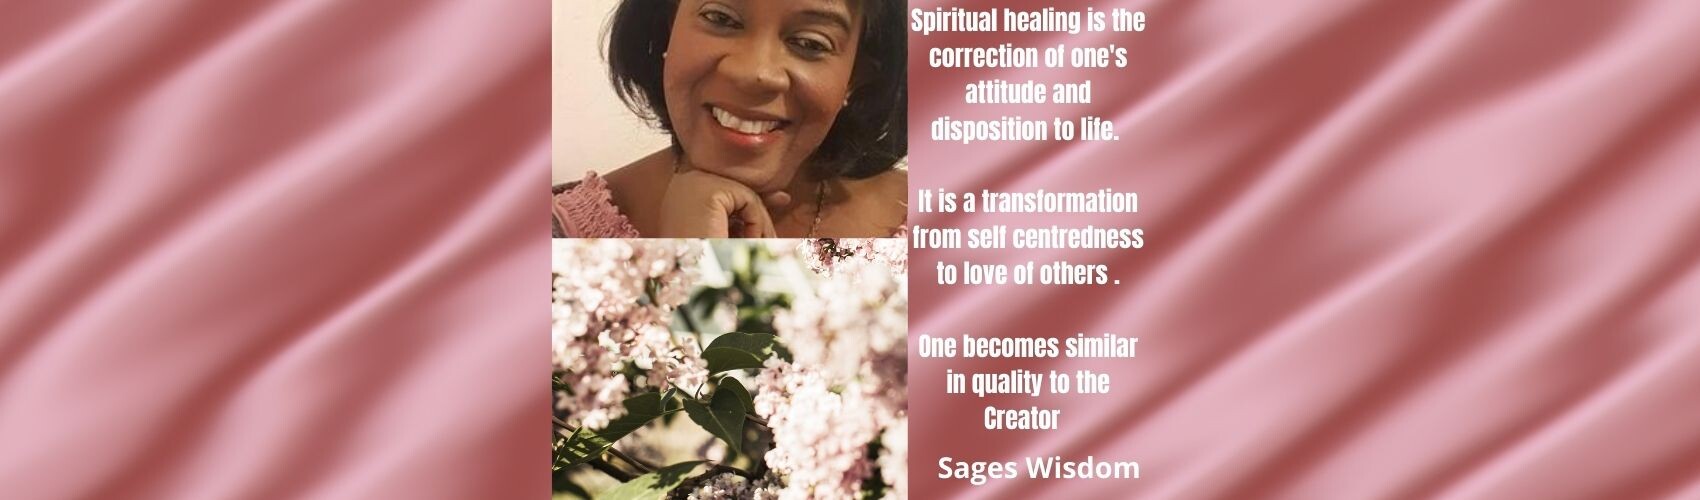 Spirituality For Beginners – Where we are challenged the most represent the area for spiritual healing